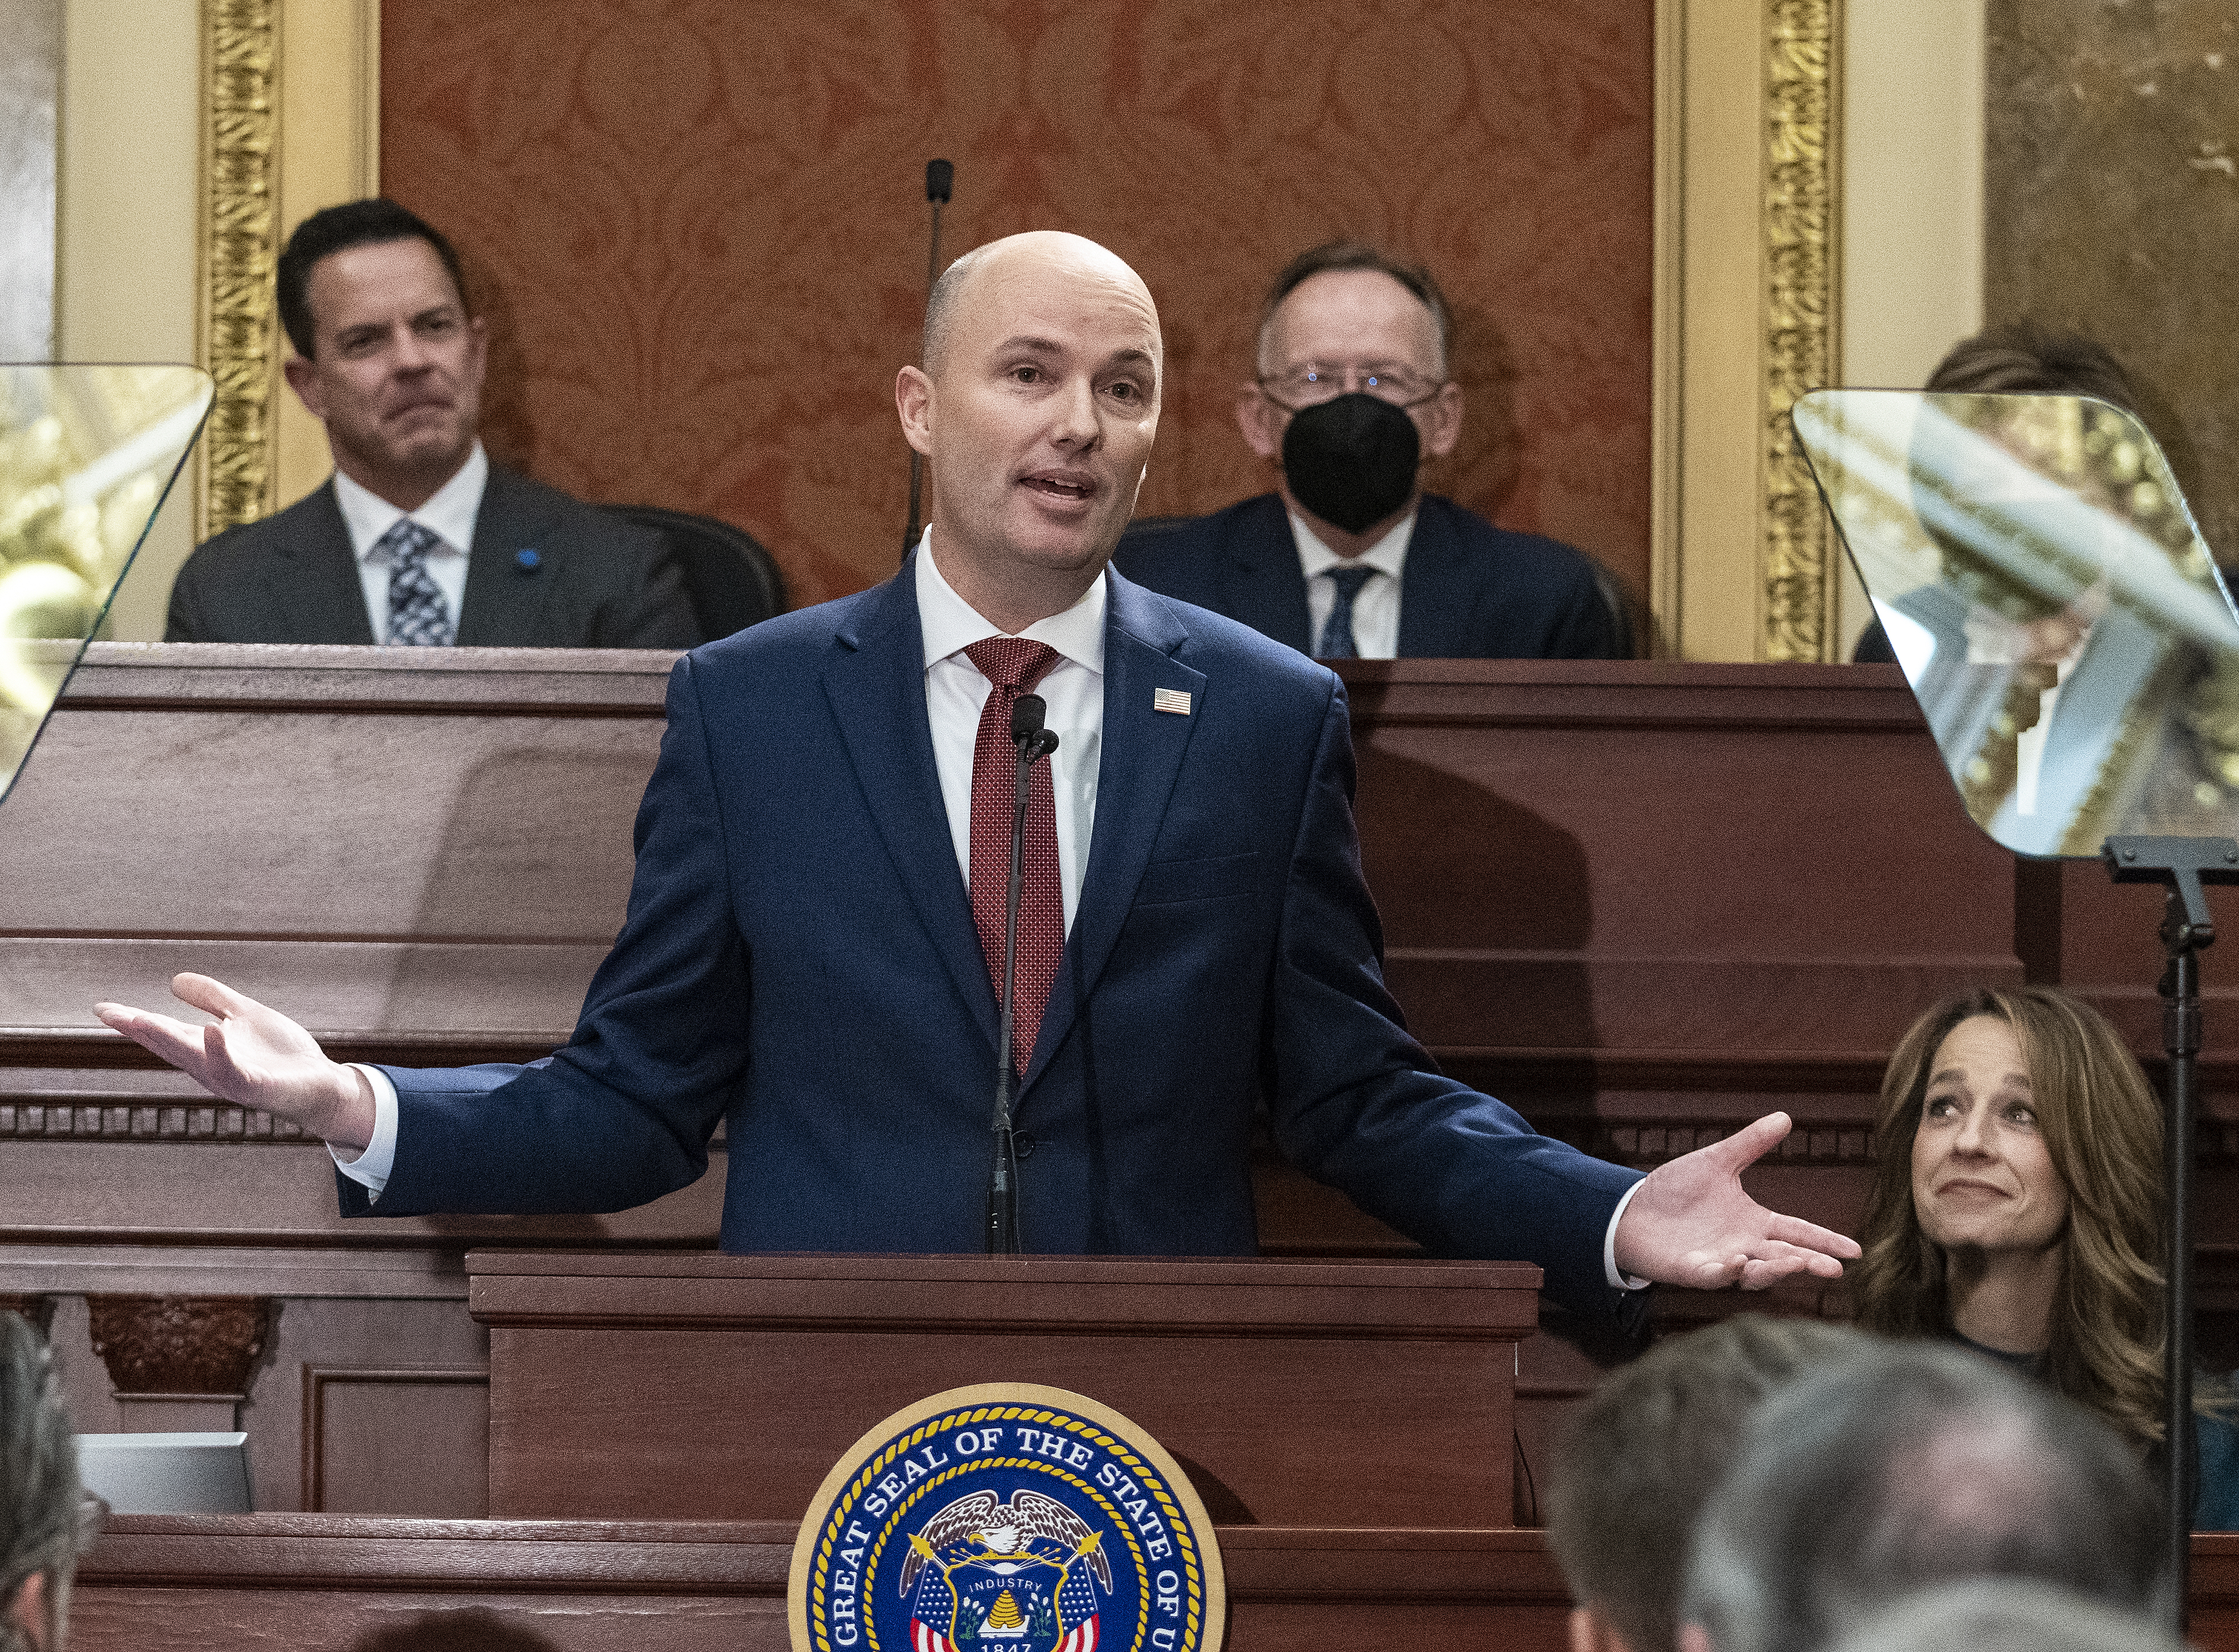 Gov. Spencer Cox delivers his State of the State address in the Utah House chamber at the Capitol in Salt Lake City.